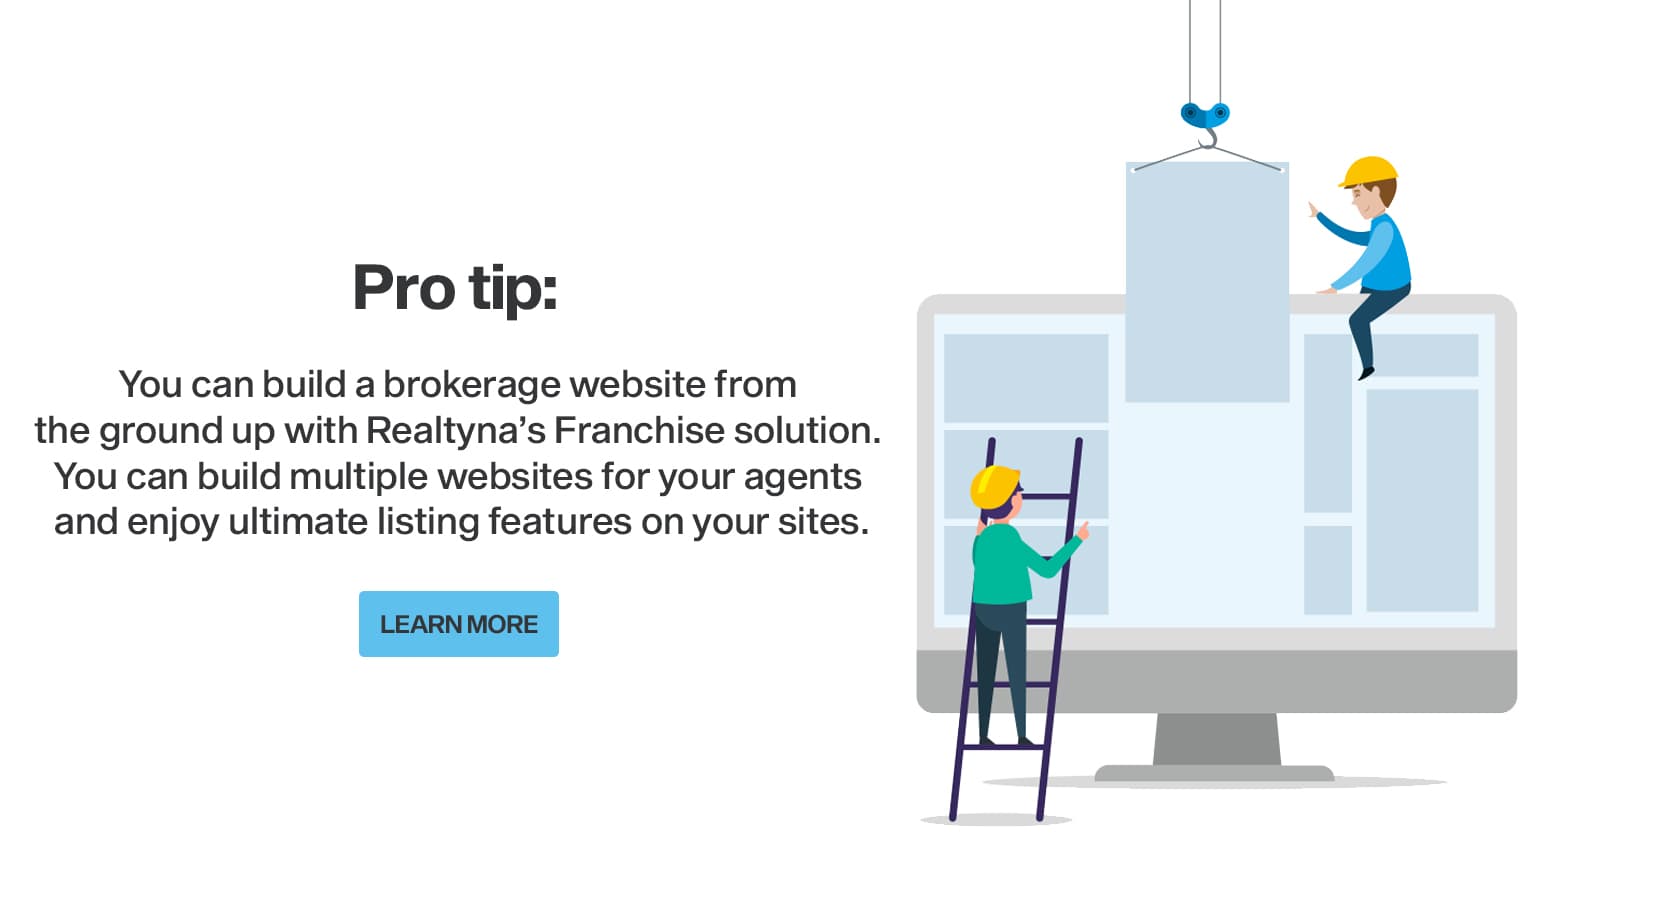 Realtyna's Franchise Solution